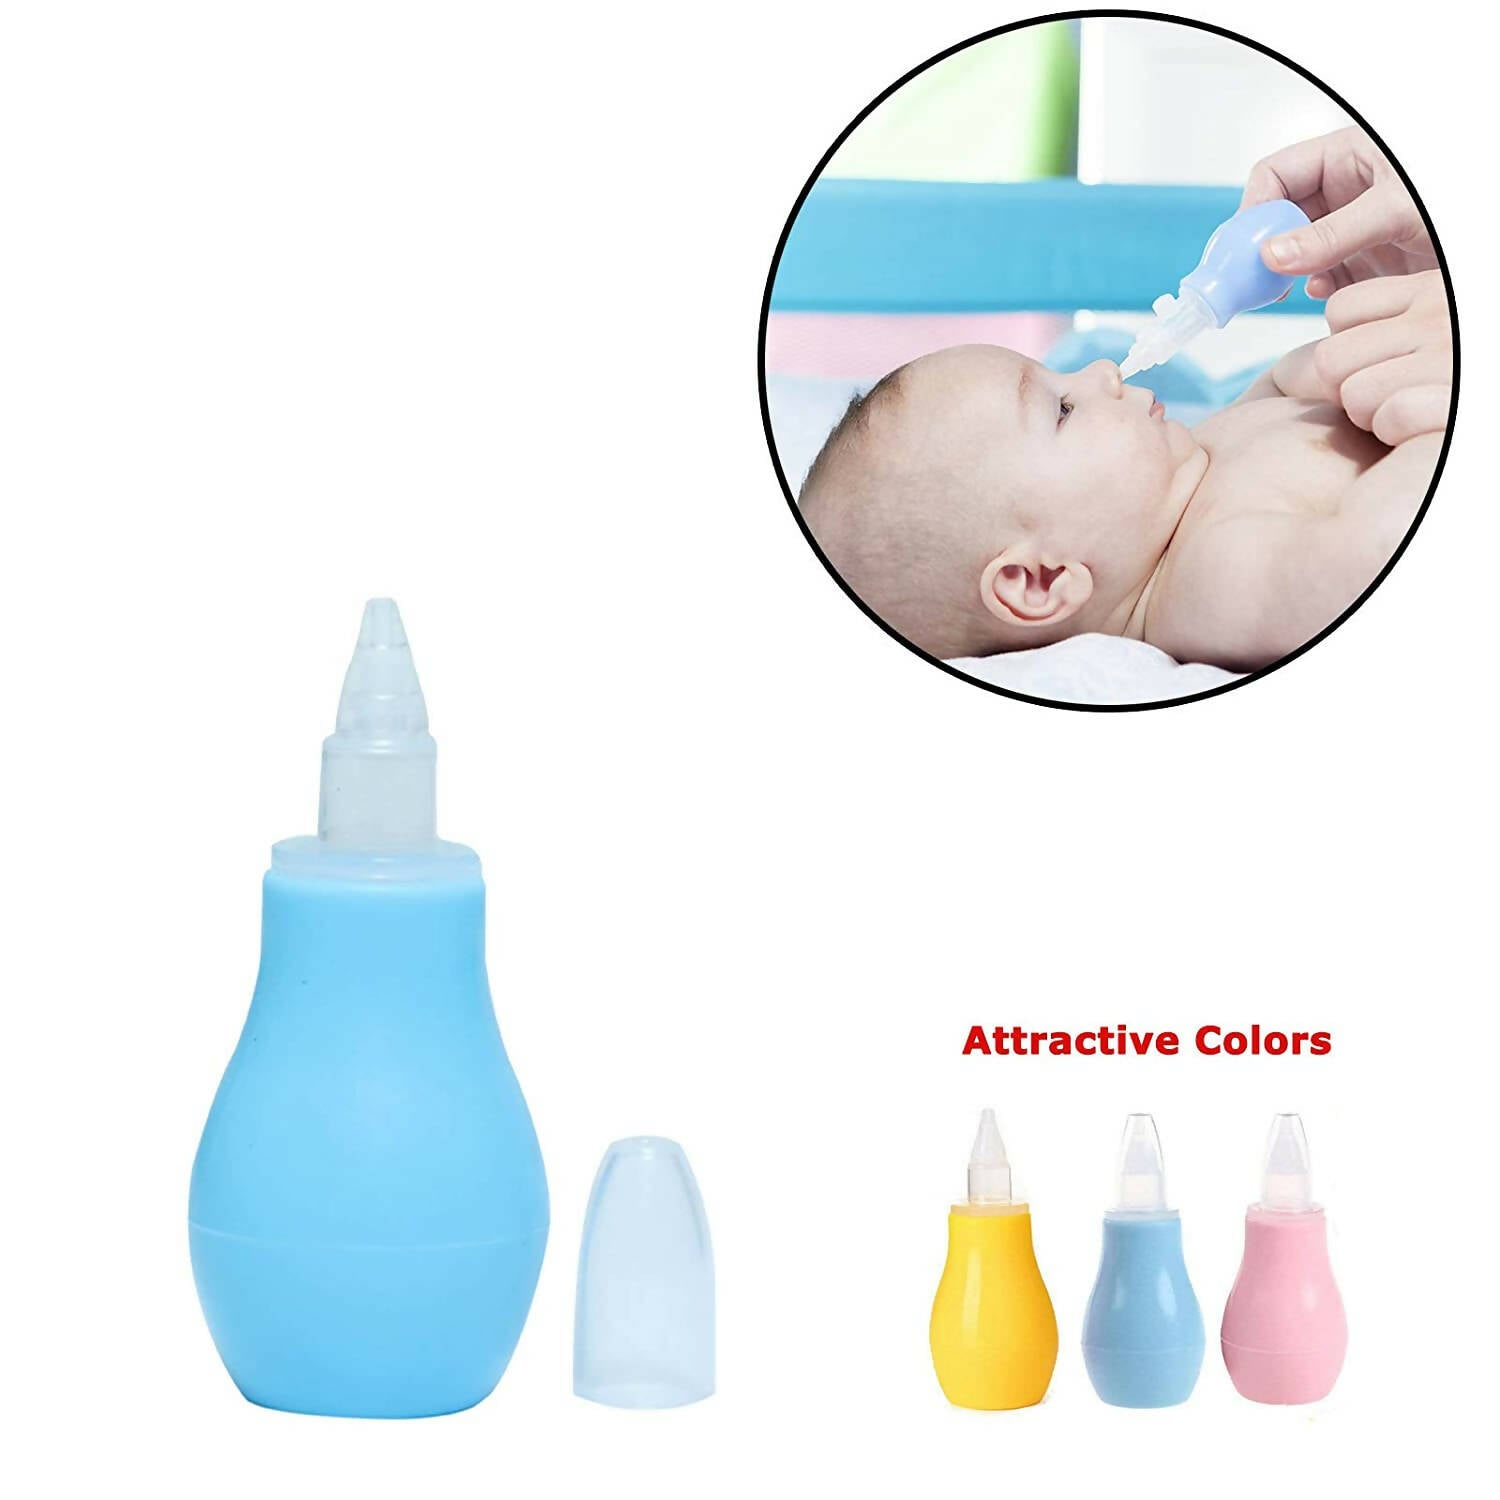 HANNEA Baby Water Cup Silicone Water Cup for Toddlers Food Grade Price in  India - Buy HANNEA Baby Water Cup Silicone Water Cup for Toddlers Food  Grade online at